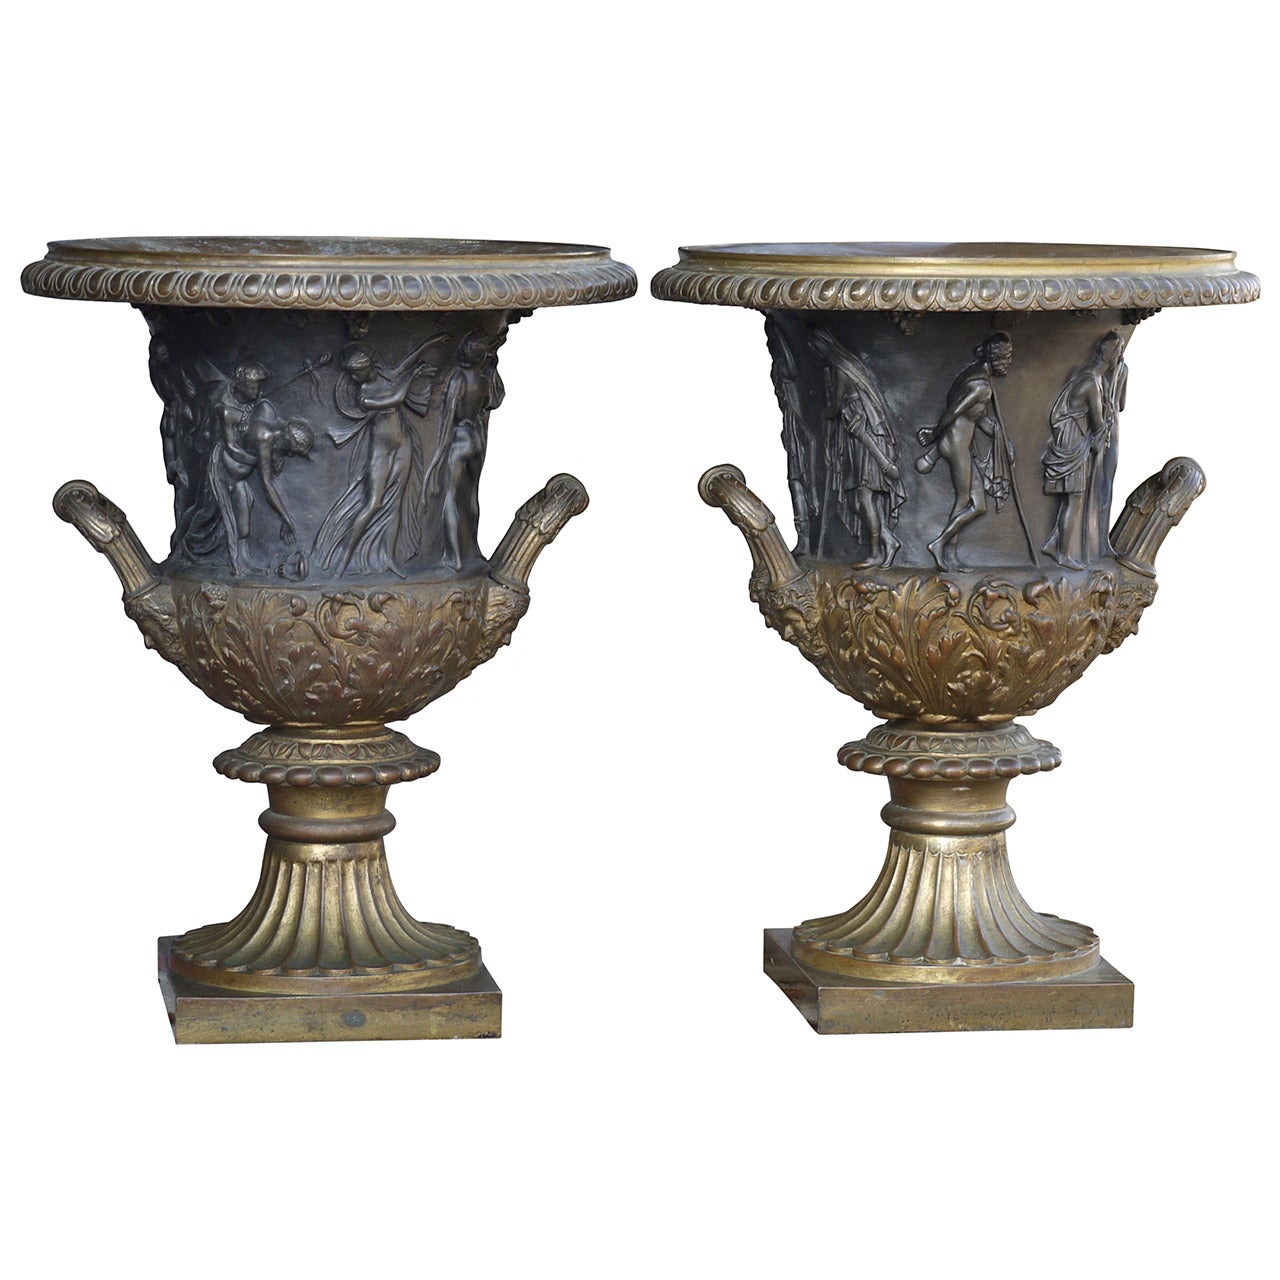 Pair of 19th Century Bronze Campana Urns After the Medici and Borghese Models